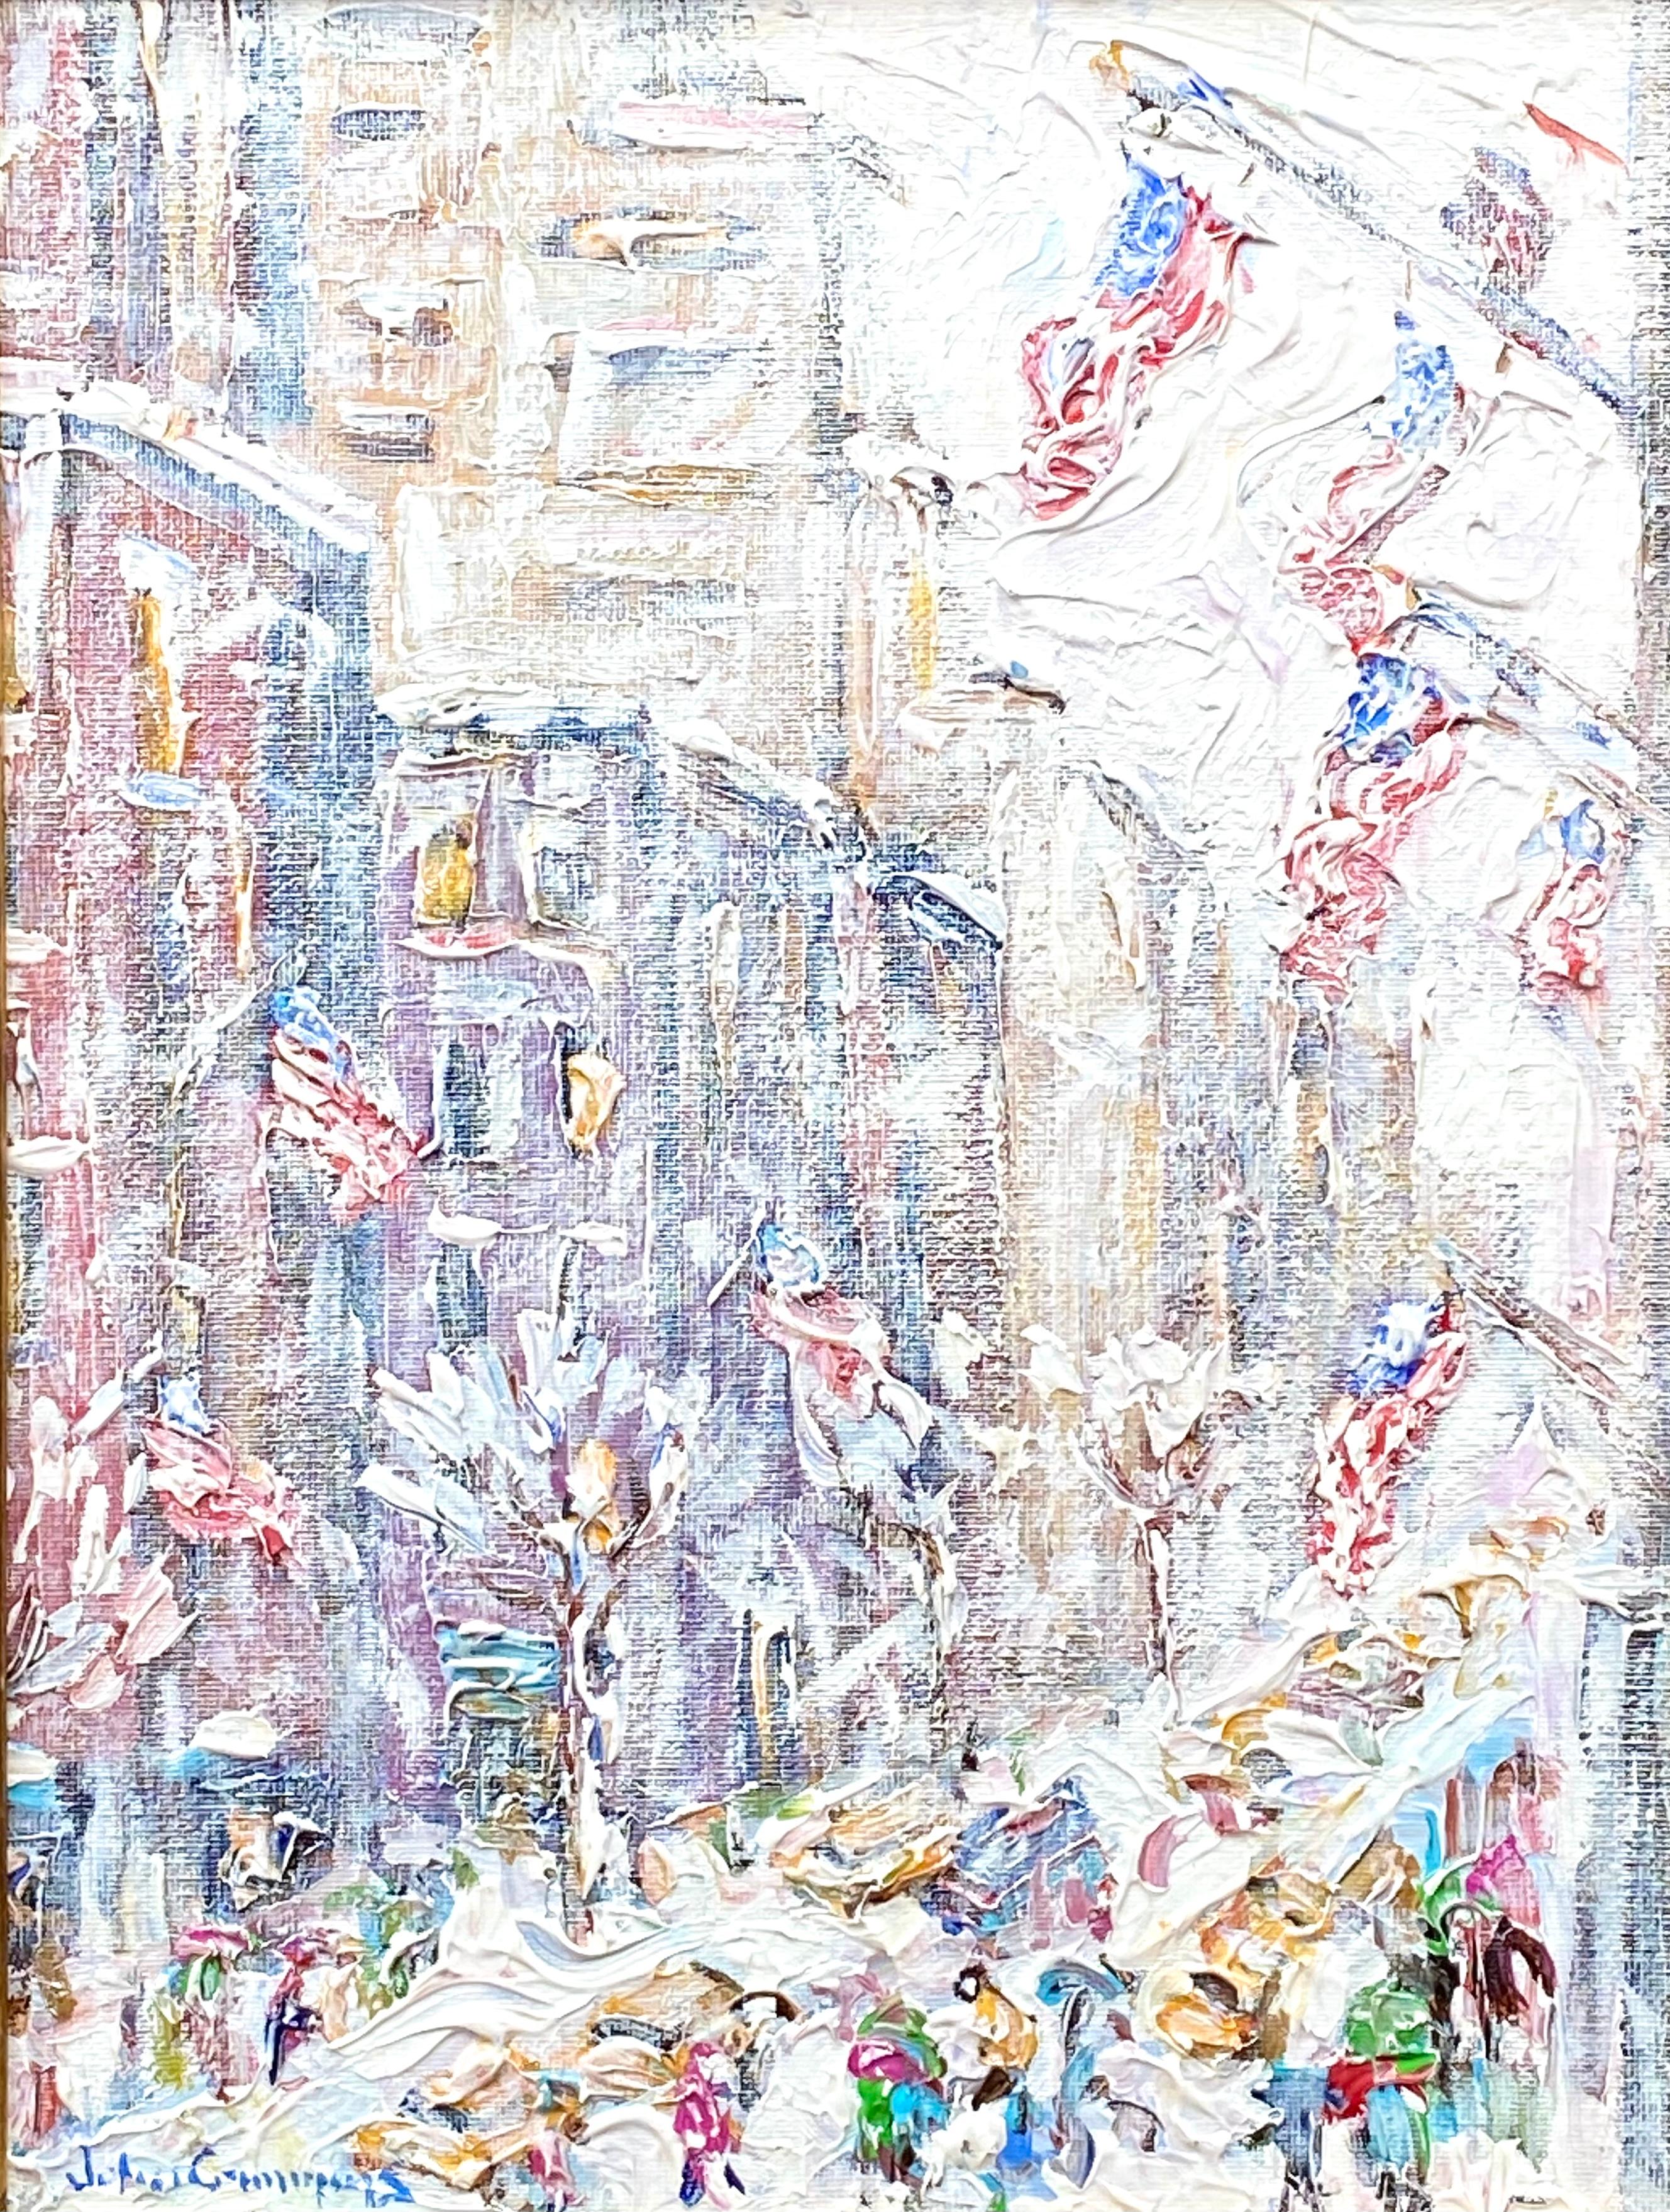 “Flags on Fifth Avenue”